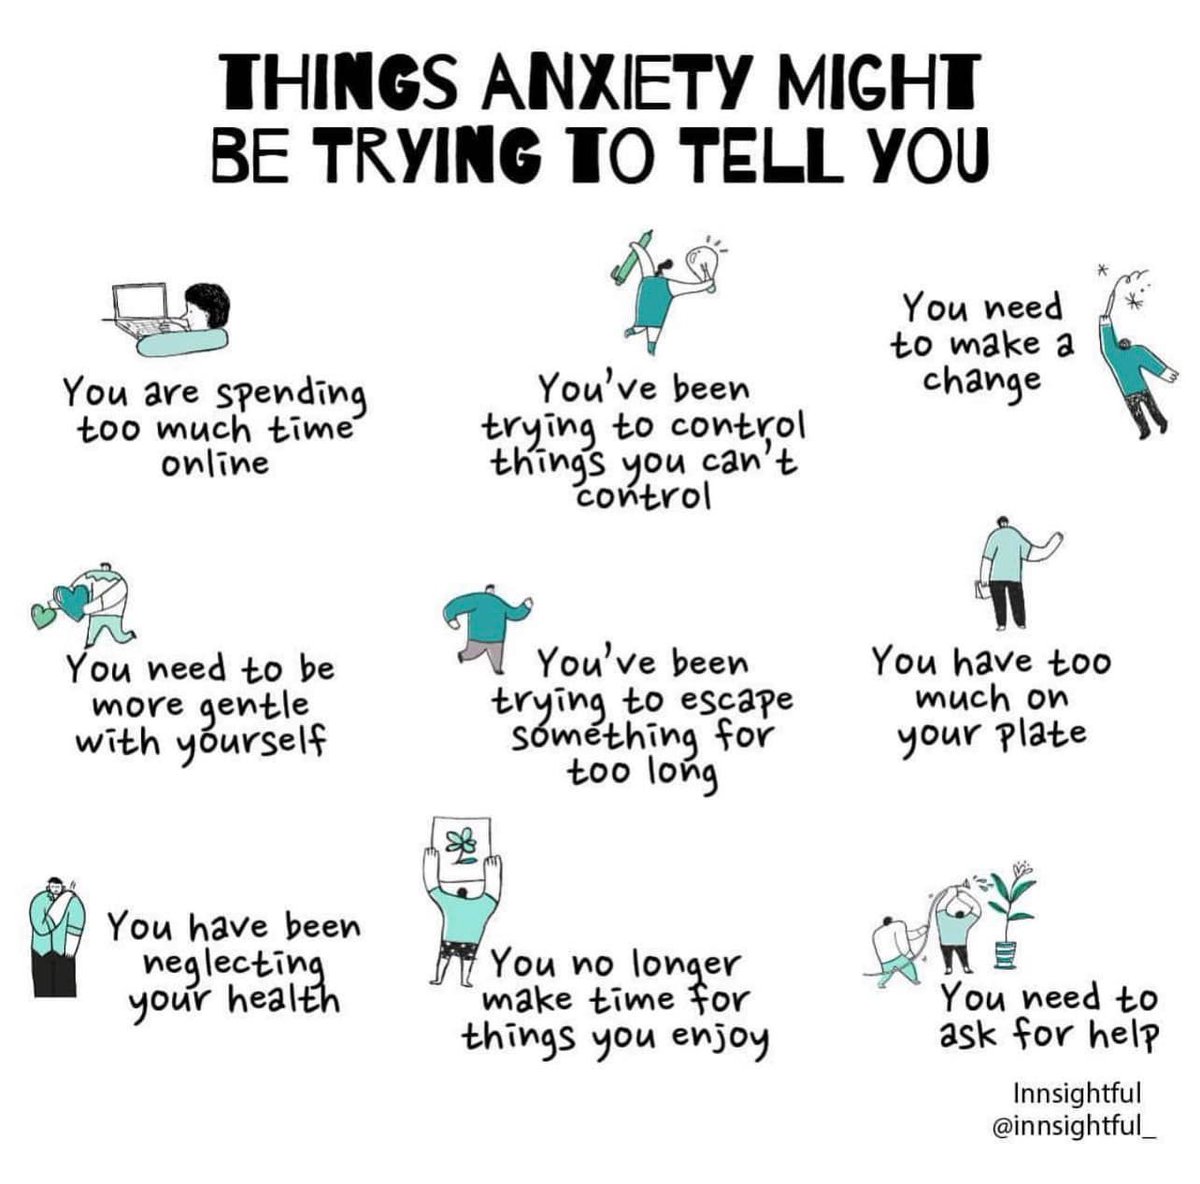 Listen to your anxiety. It's okay to acknowledge your feelings and take steps to manage them. #MentalHealthAwareness #SelfCare